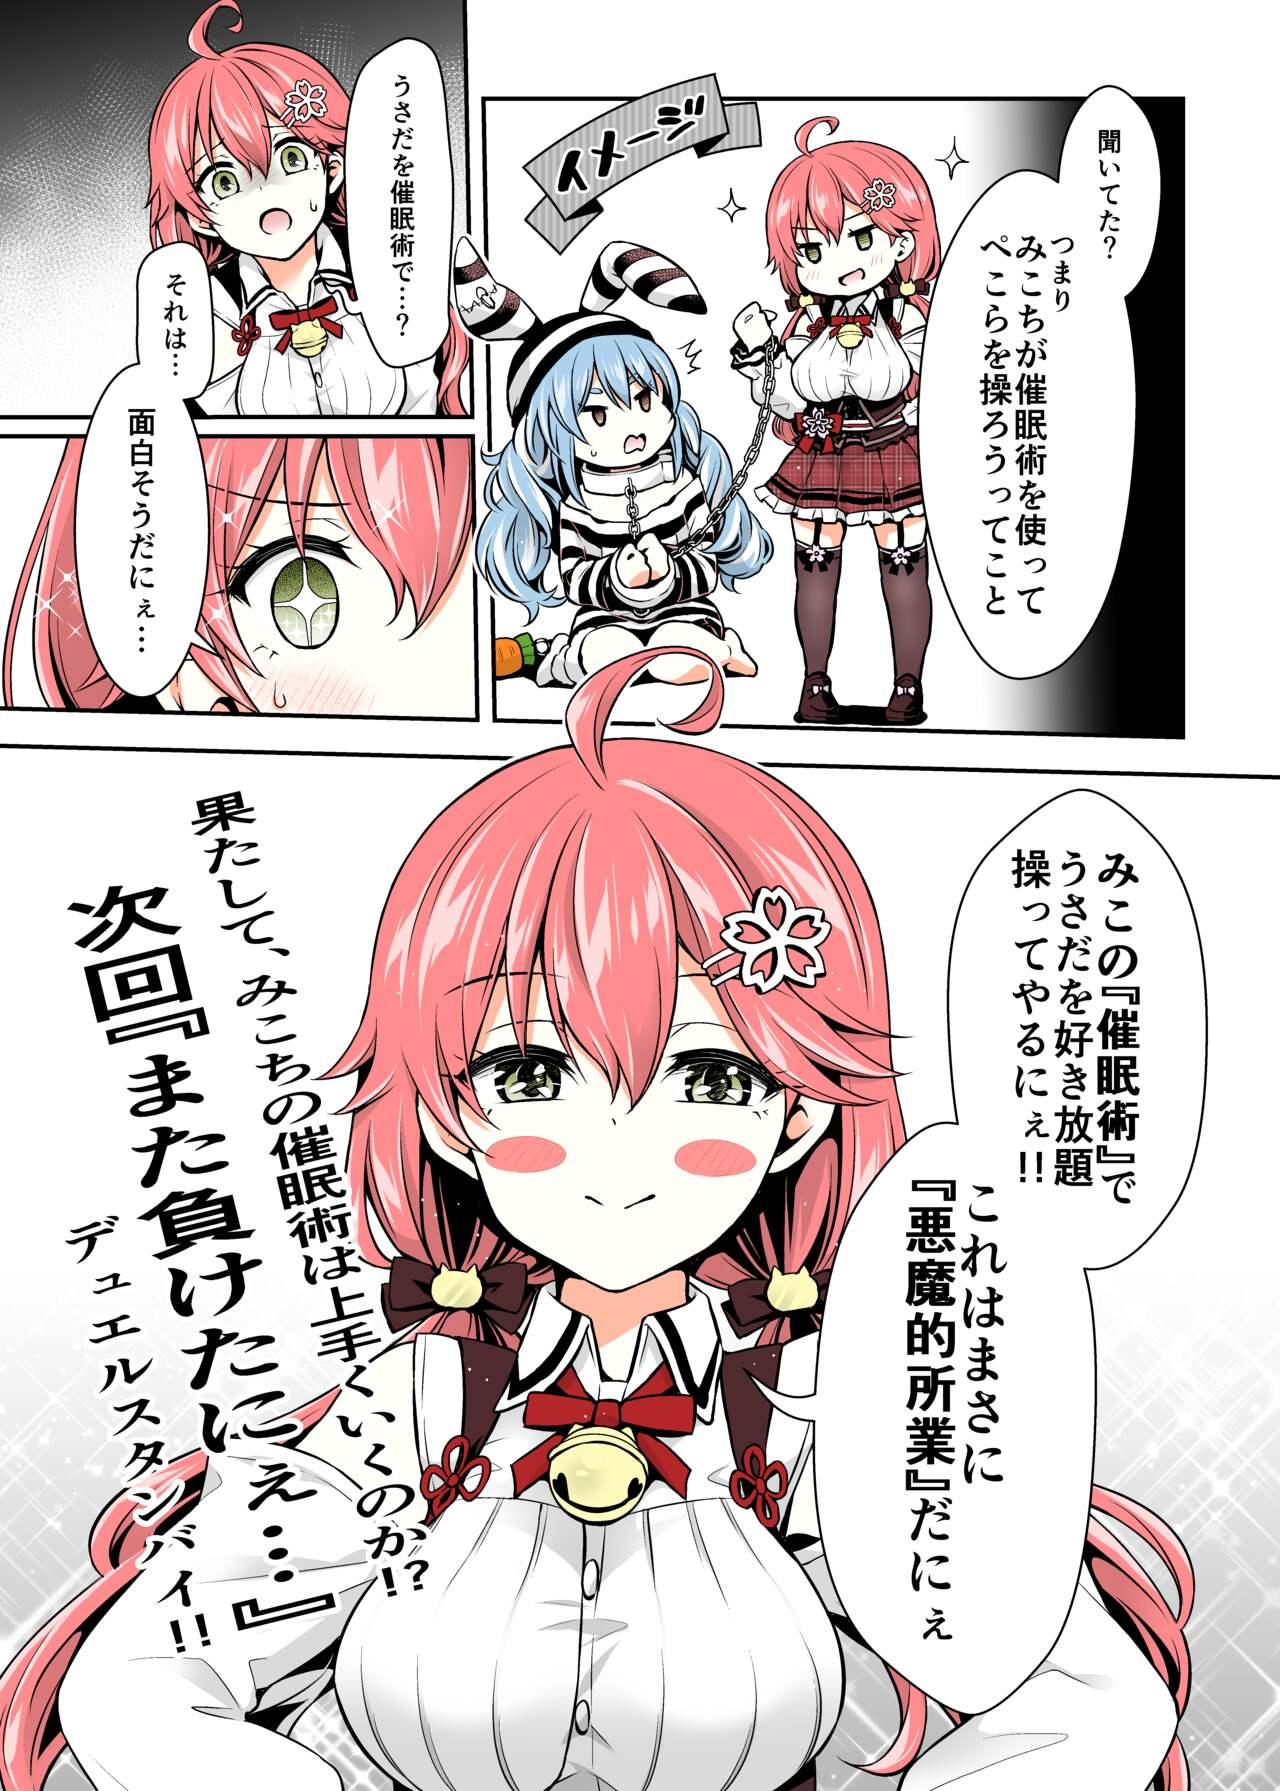 Toilet みこち催眠えっち本2 ～悪魔的所業編～ - Hololive Hermosa - Page 6